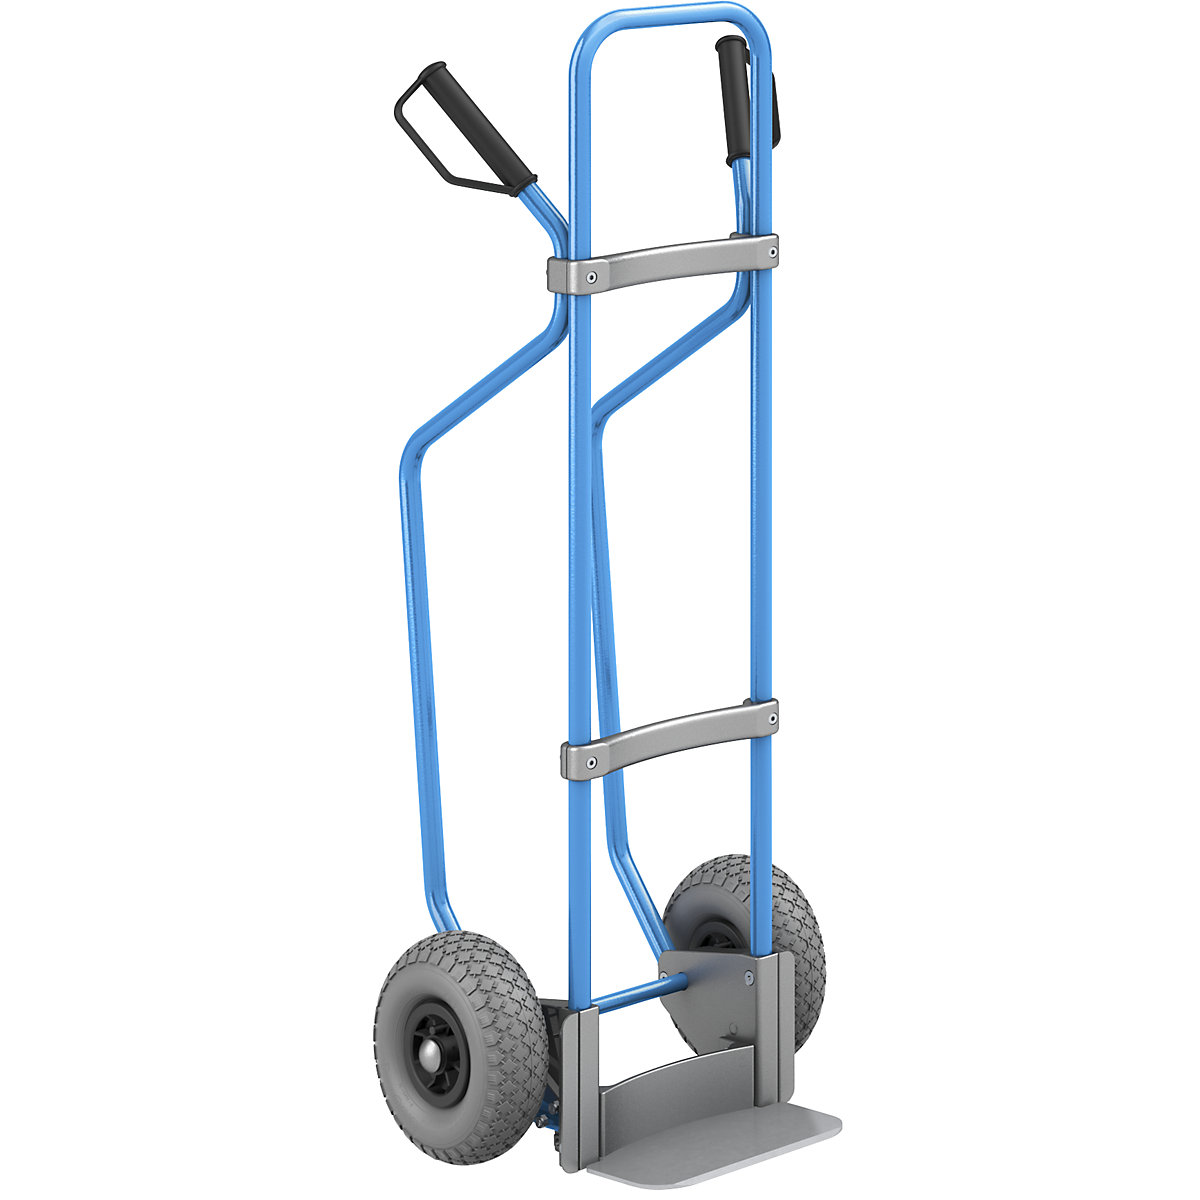 Sack truck with runners, blue – eurokraft pro, footplate WxD 280 x 140 mm, zinc plated, PU tyres, 2+ items-2